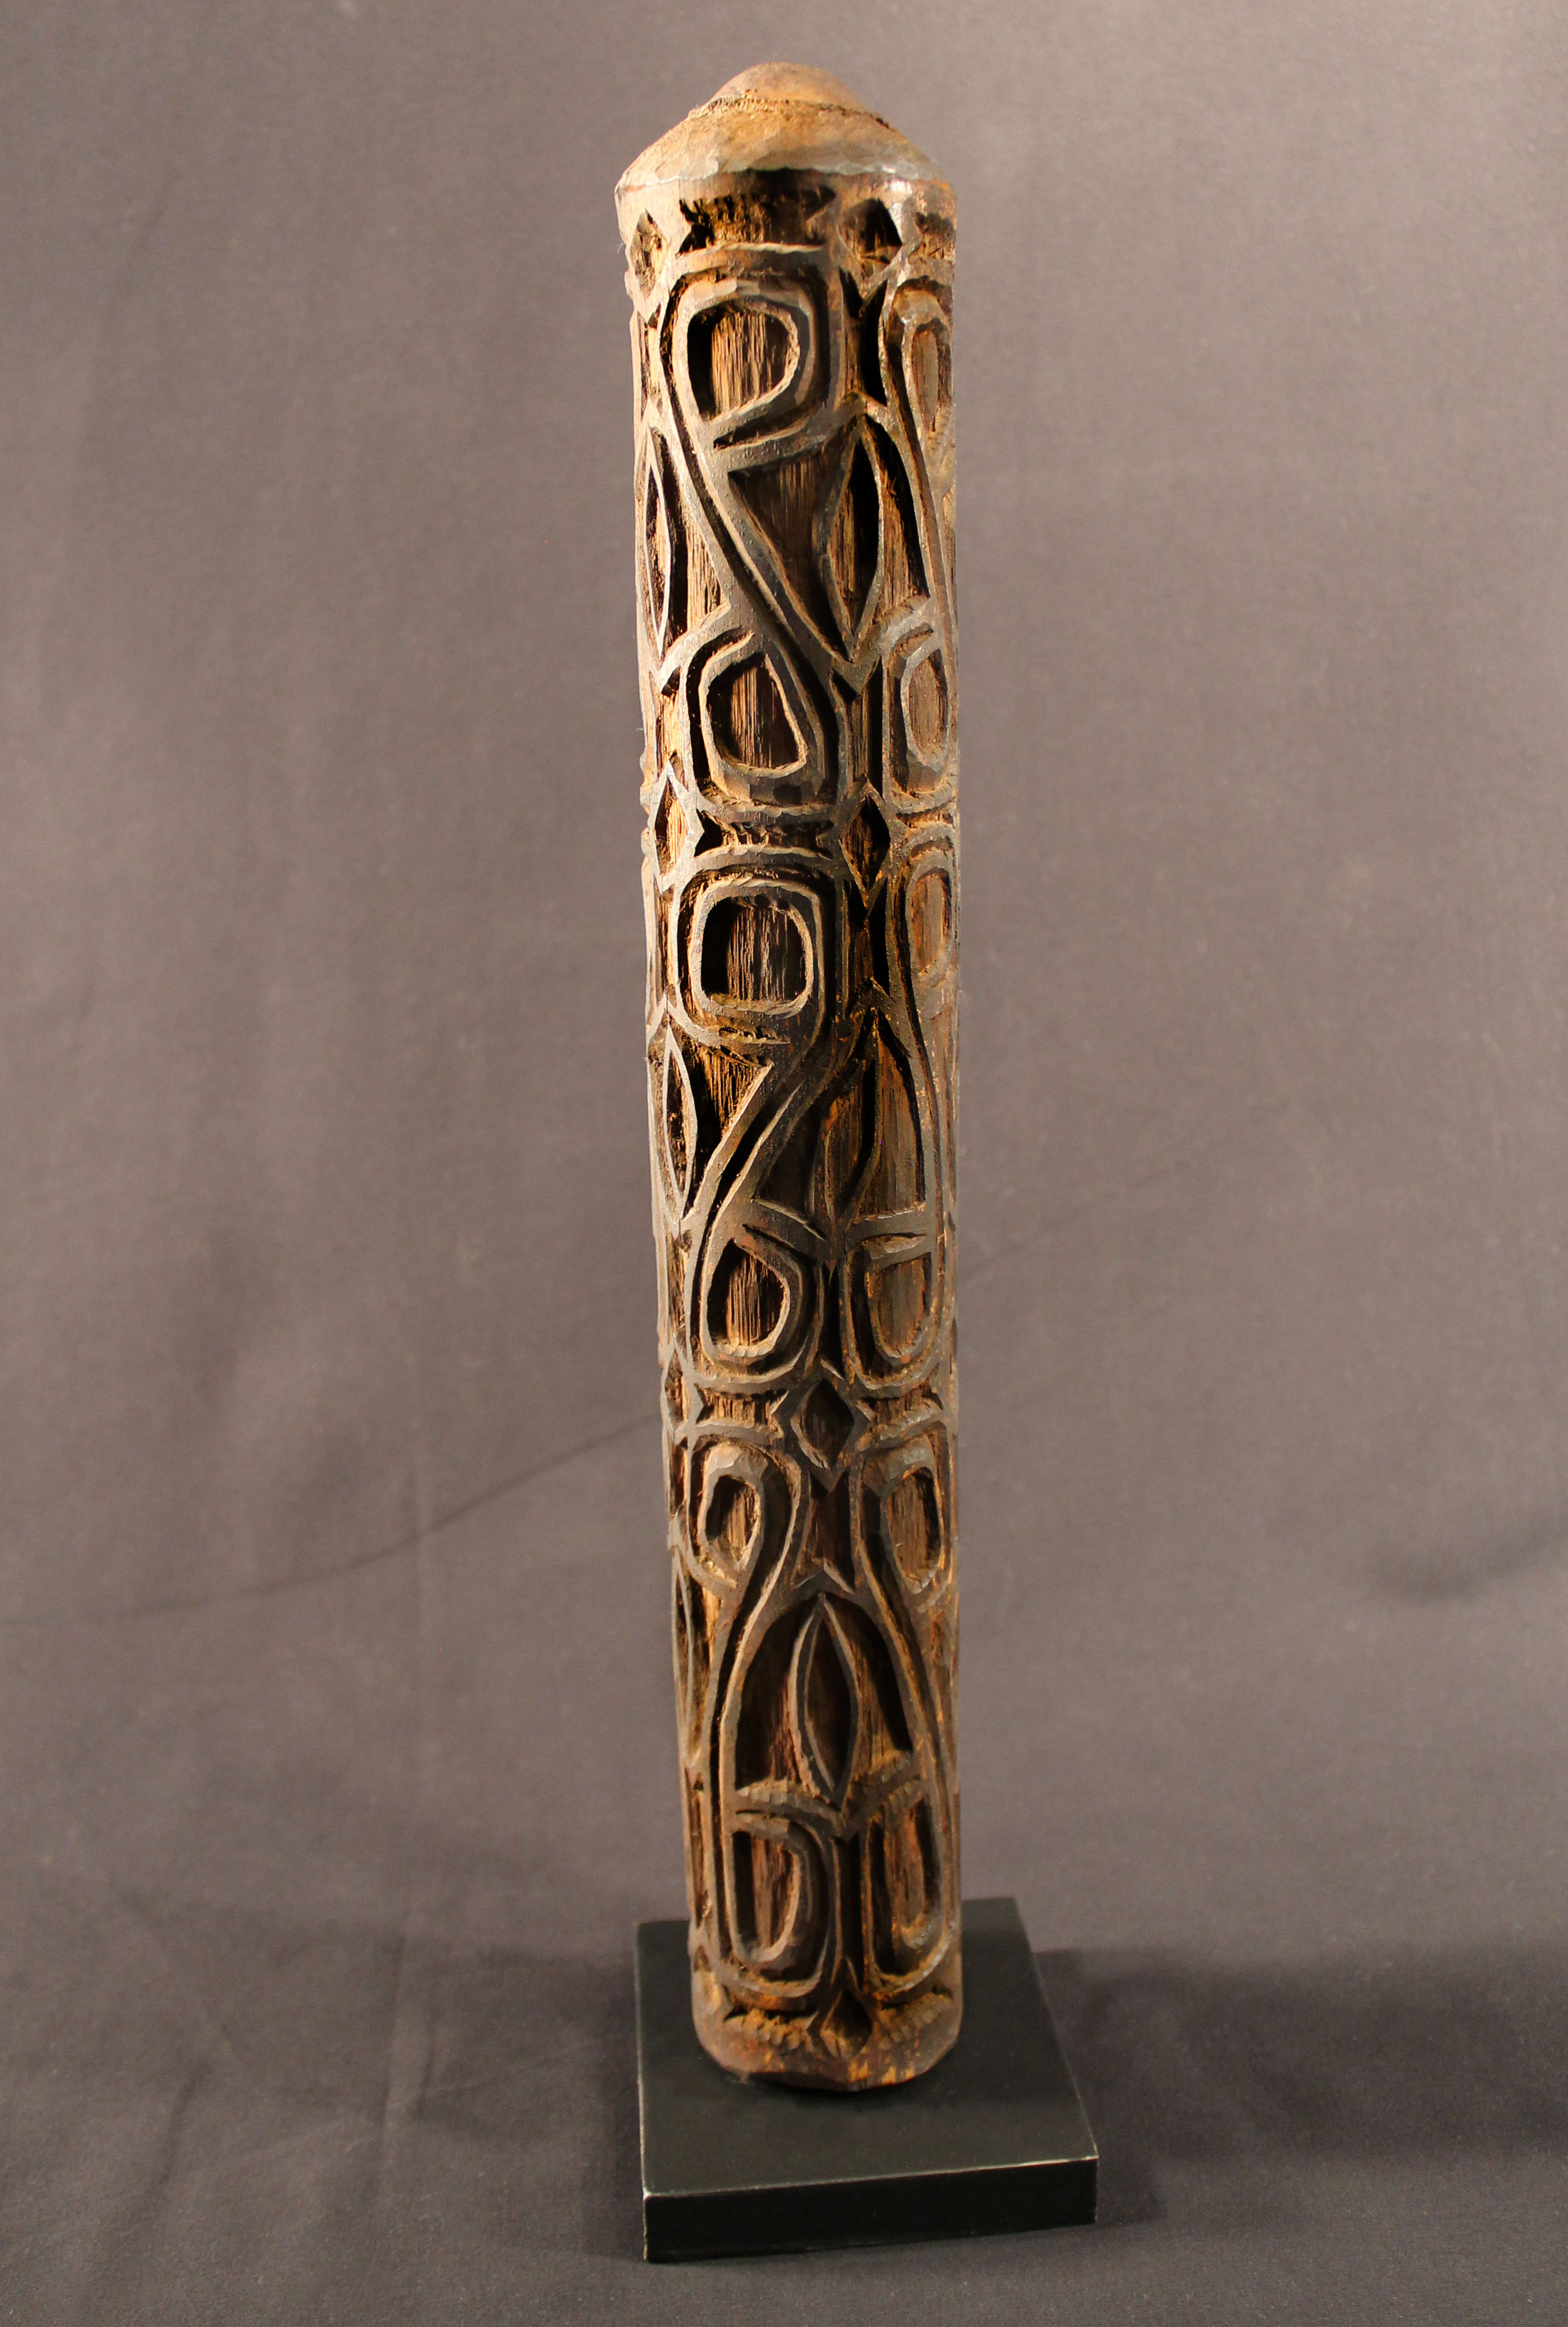 A long carved musical horn made of carved wood and is painted with charcoal, which helps the carved navel pattern to be seen. 